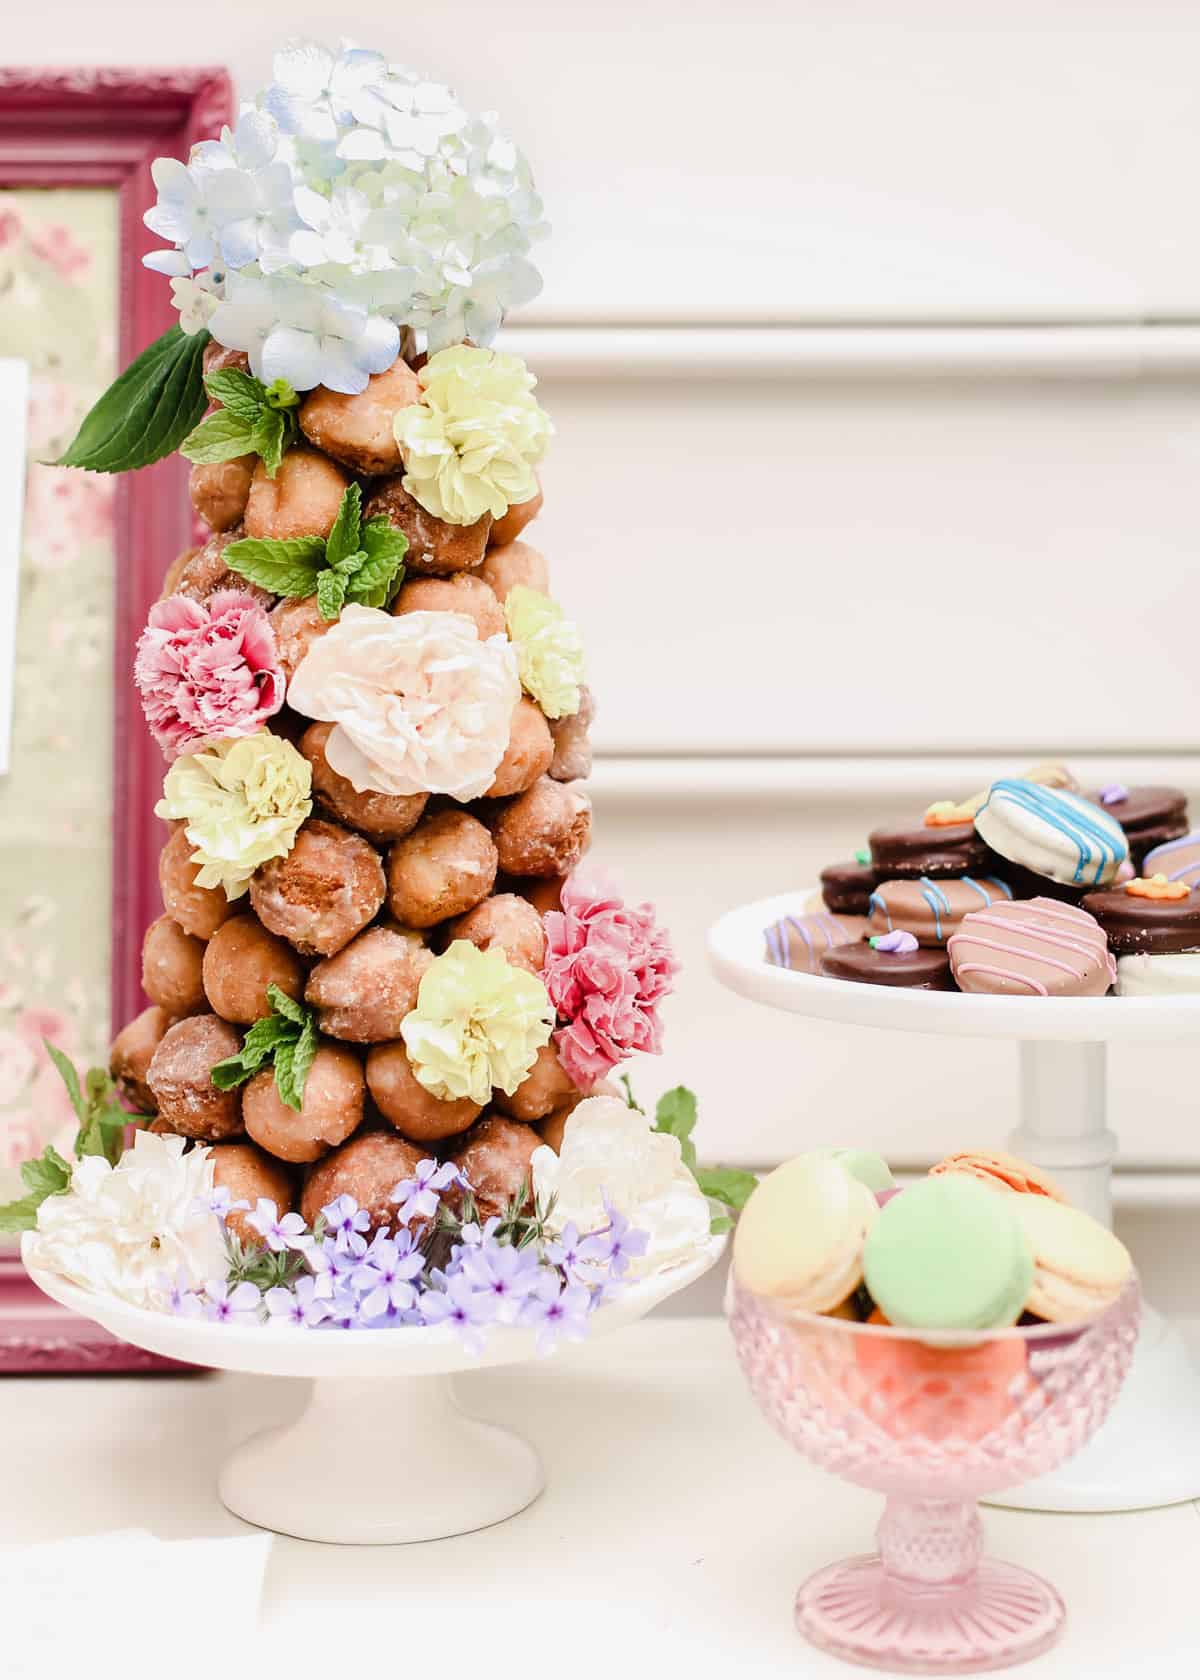 donut hole tree with fresh flowers for garnish, on table beside dish of macarons and chocolates.